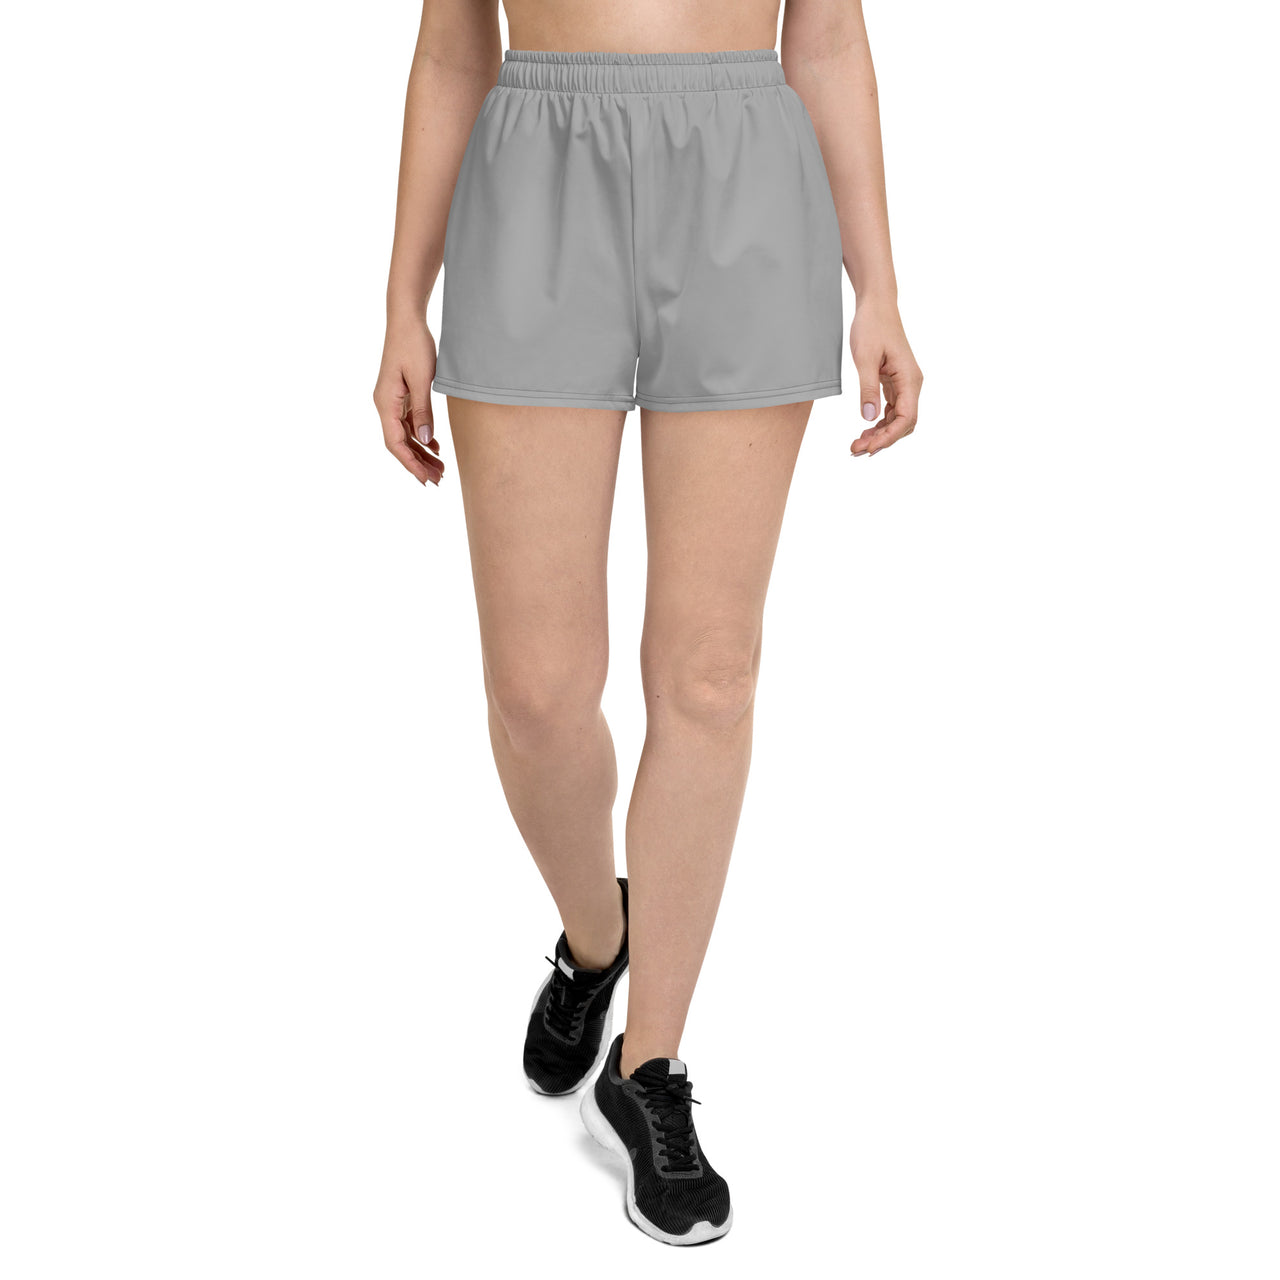 Women’s Recycled Solid Athletic Shorts - Pewter SHAVA CO